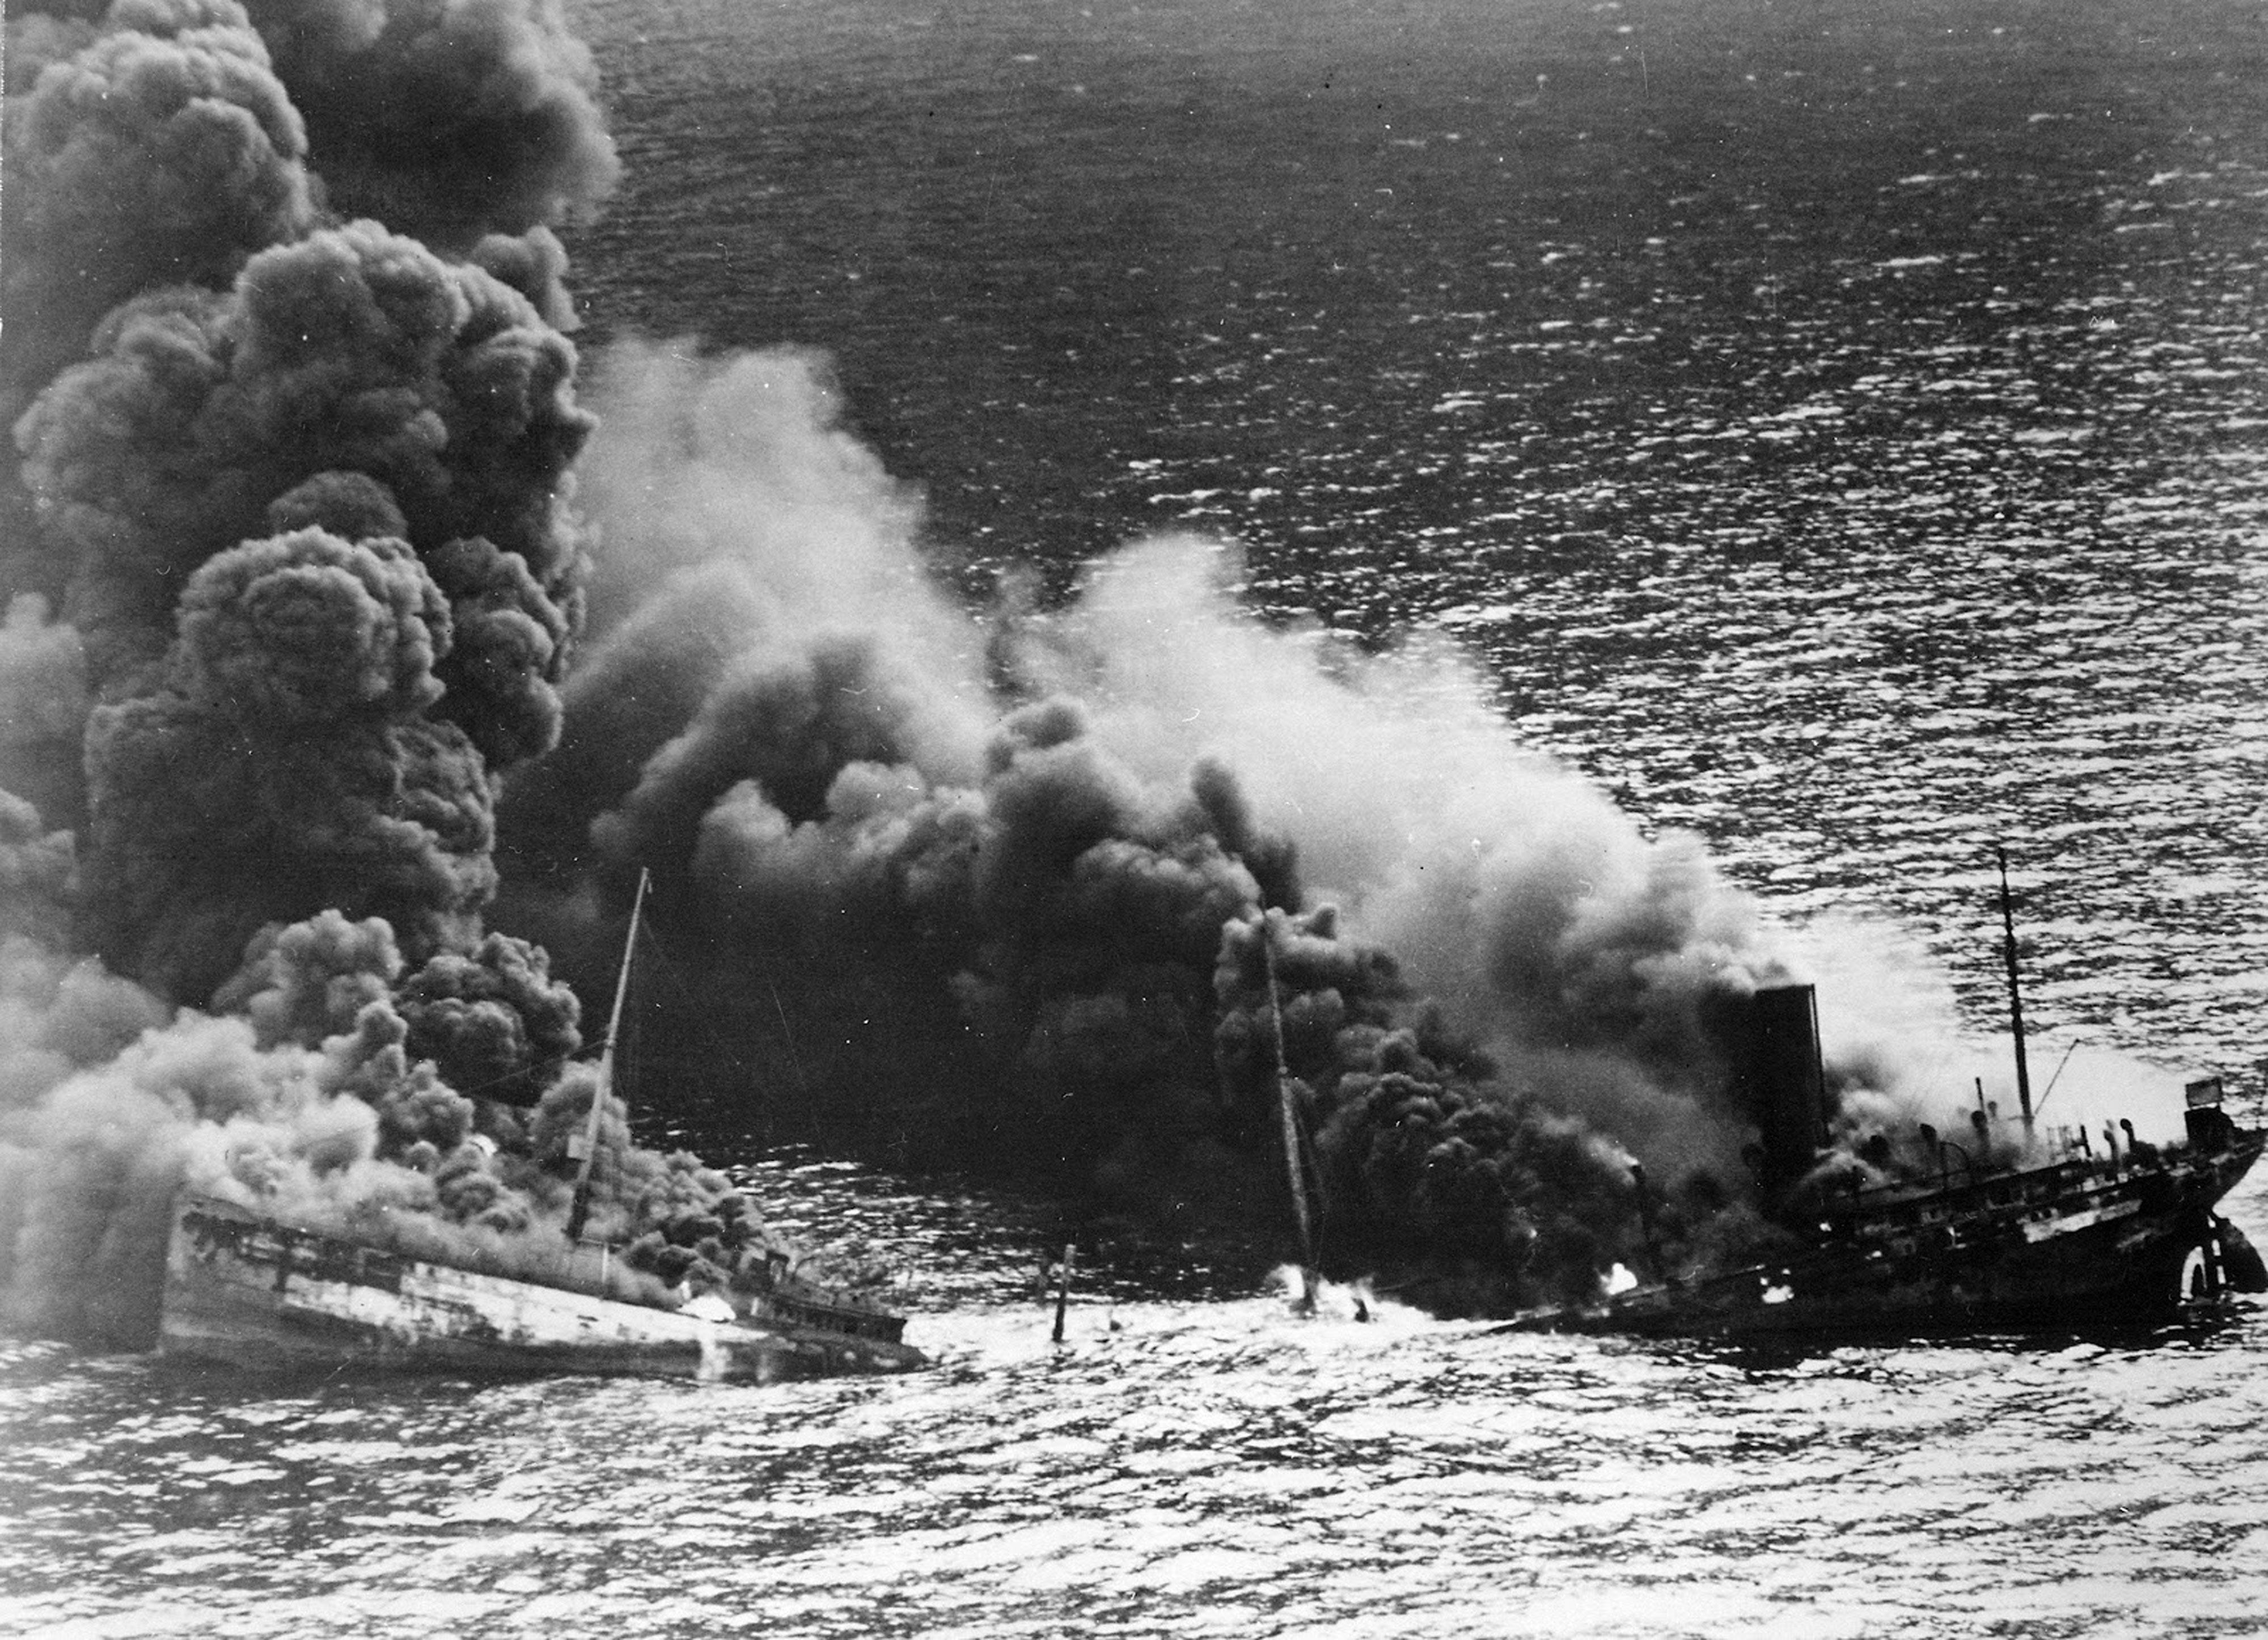 Dixie Arrow burning after being torpedoed by U-71 on March 26, 1942. (Photo courtesy of the National Archives)